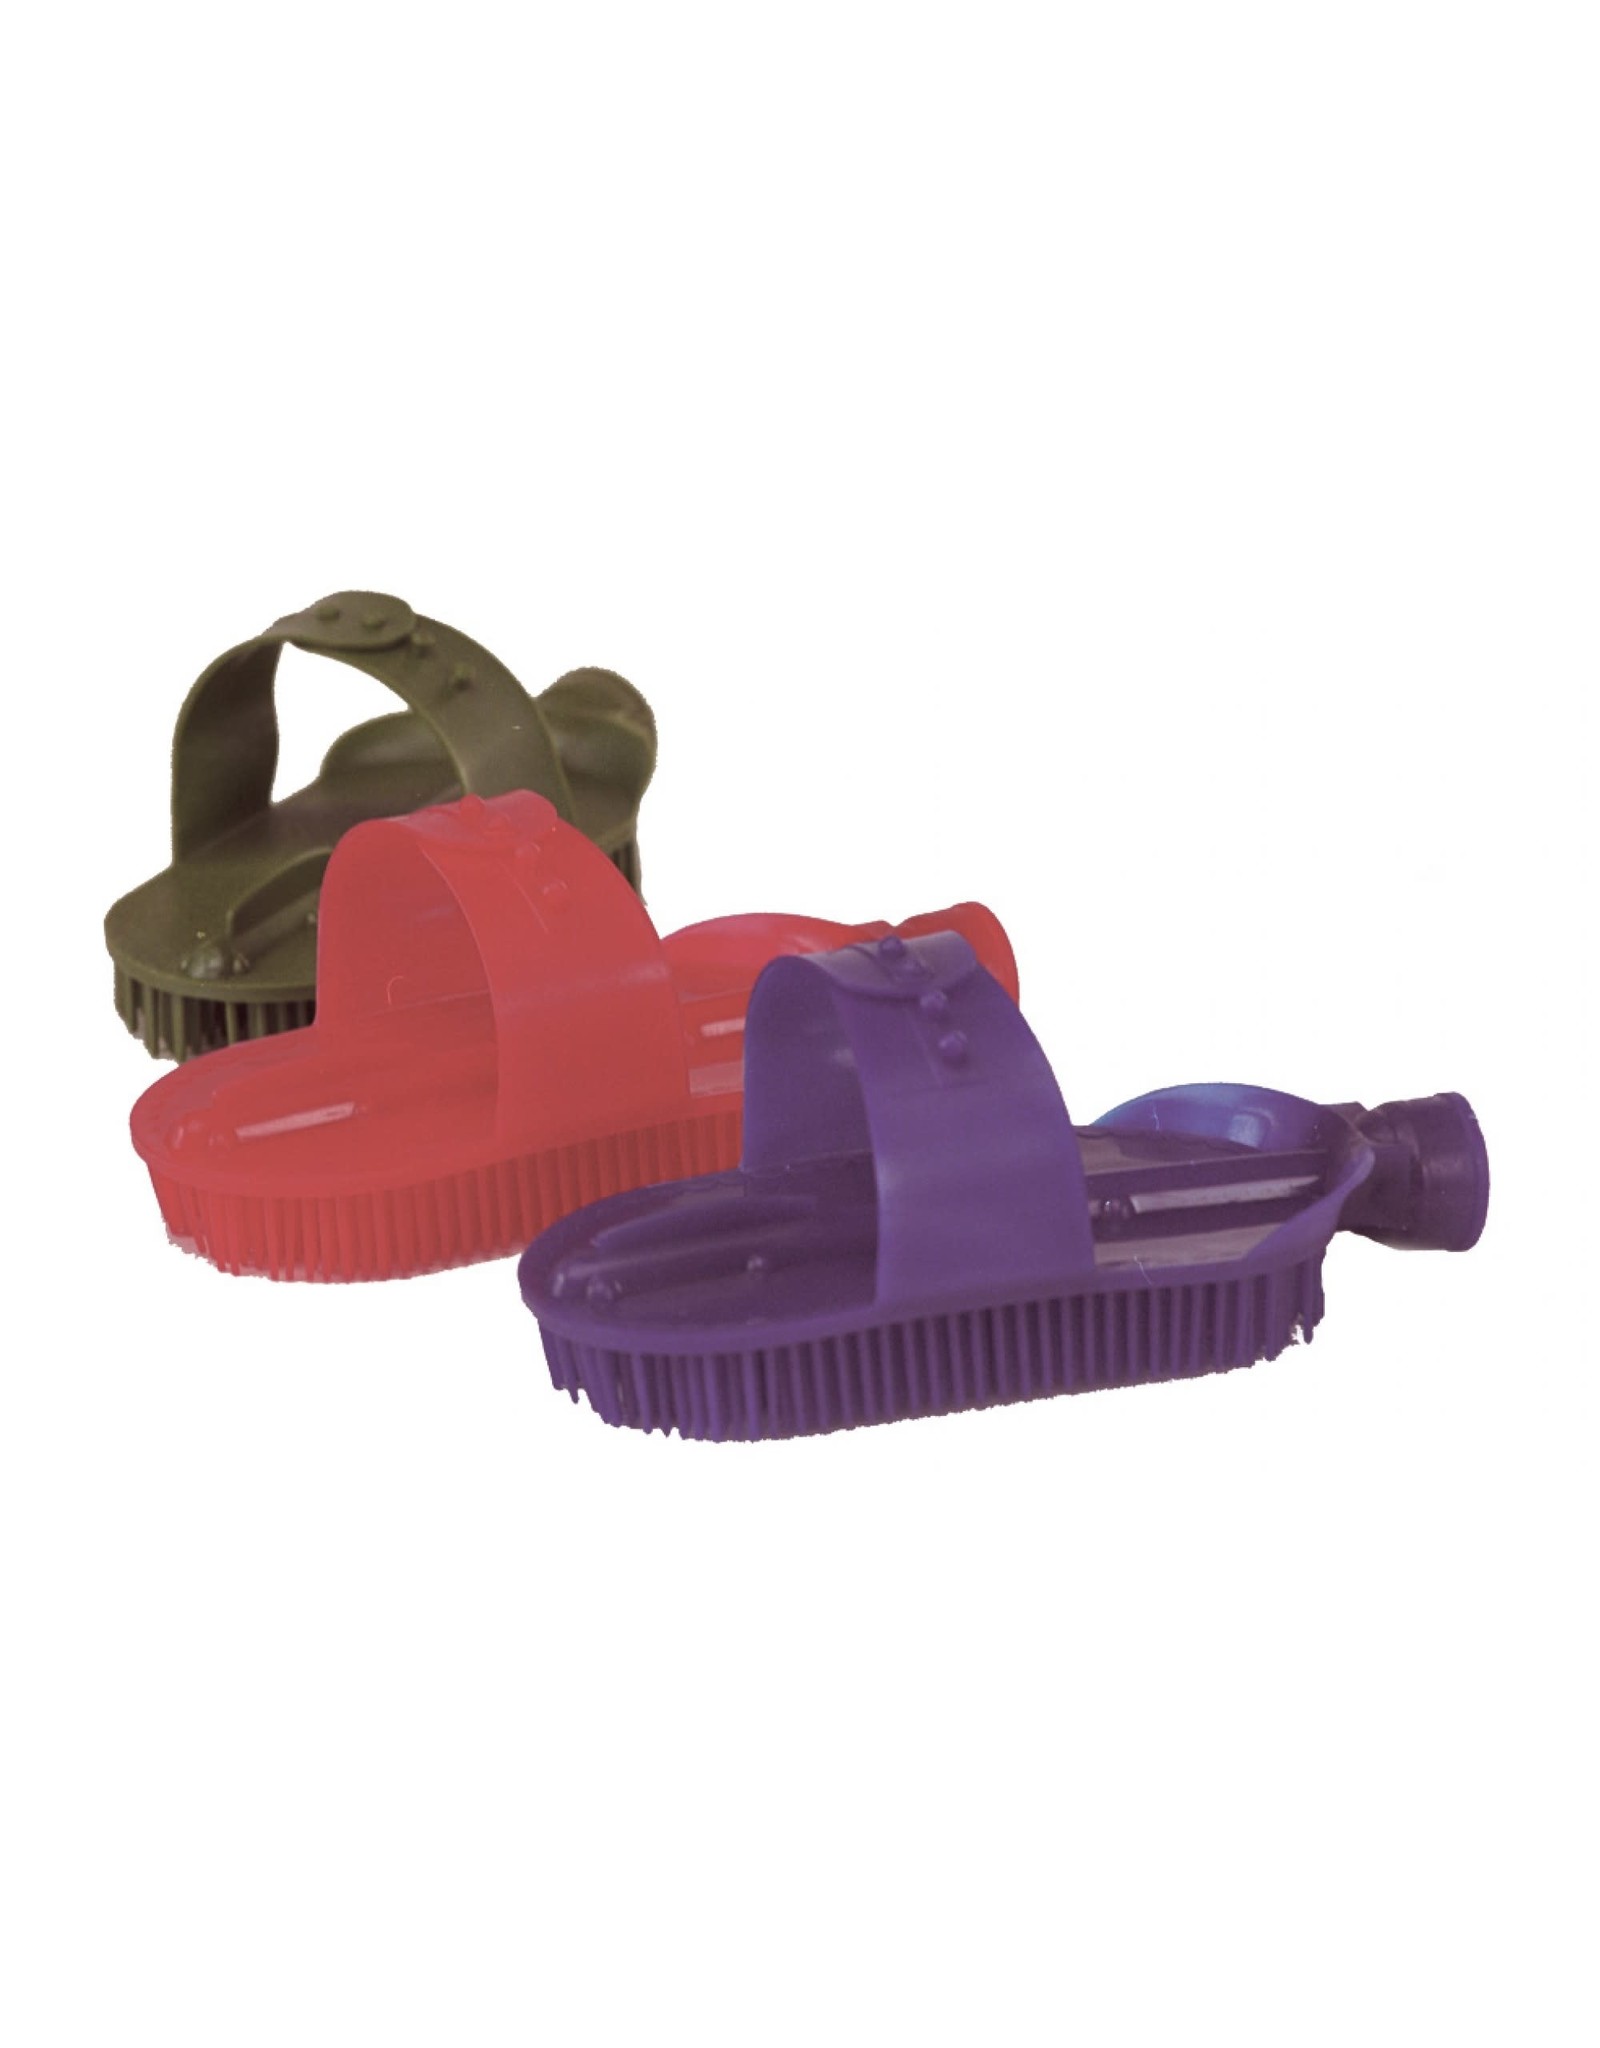 Western Rawhide Plastic Curry Comb w/ Hose Attachment